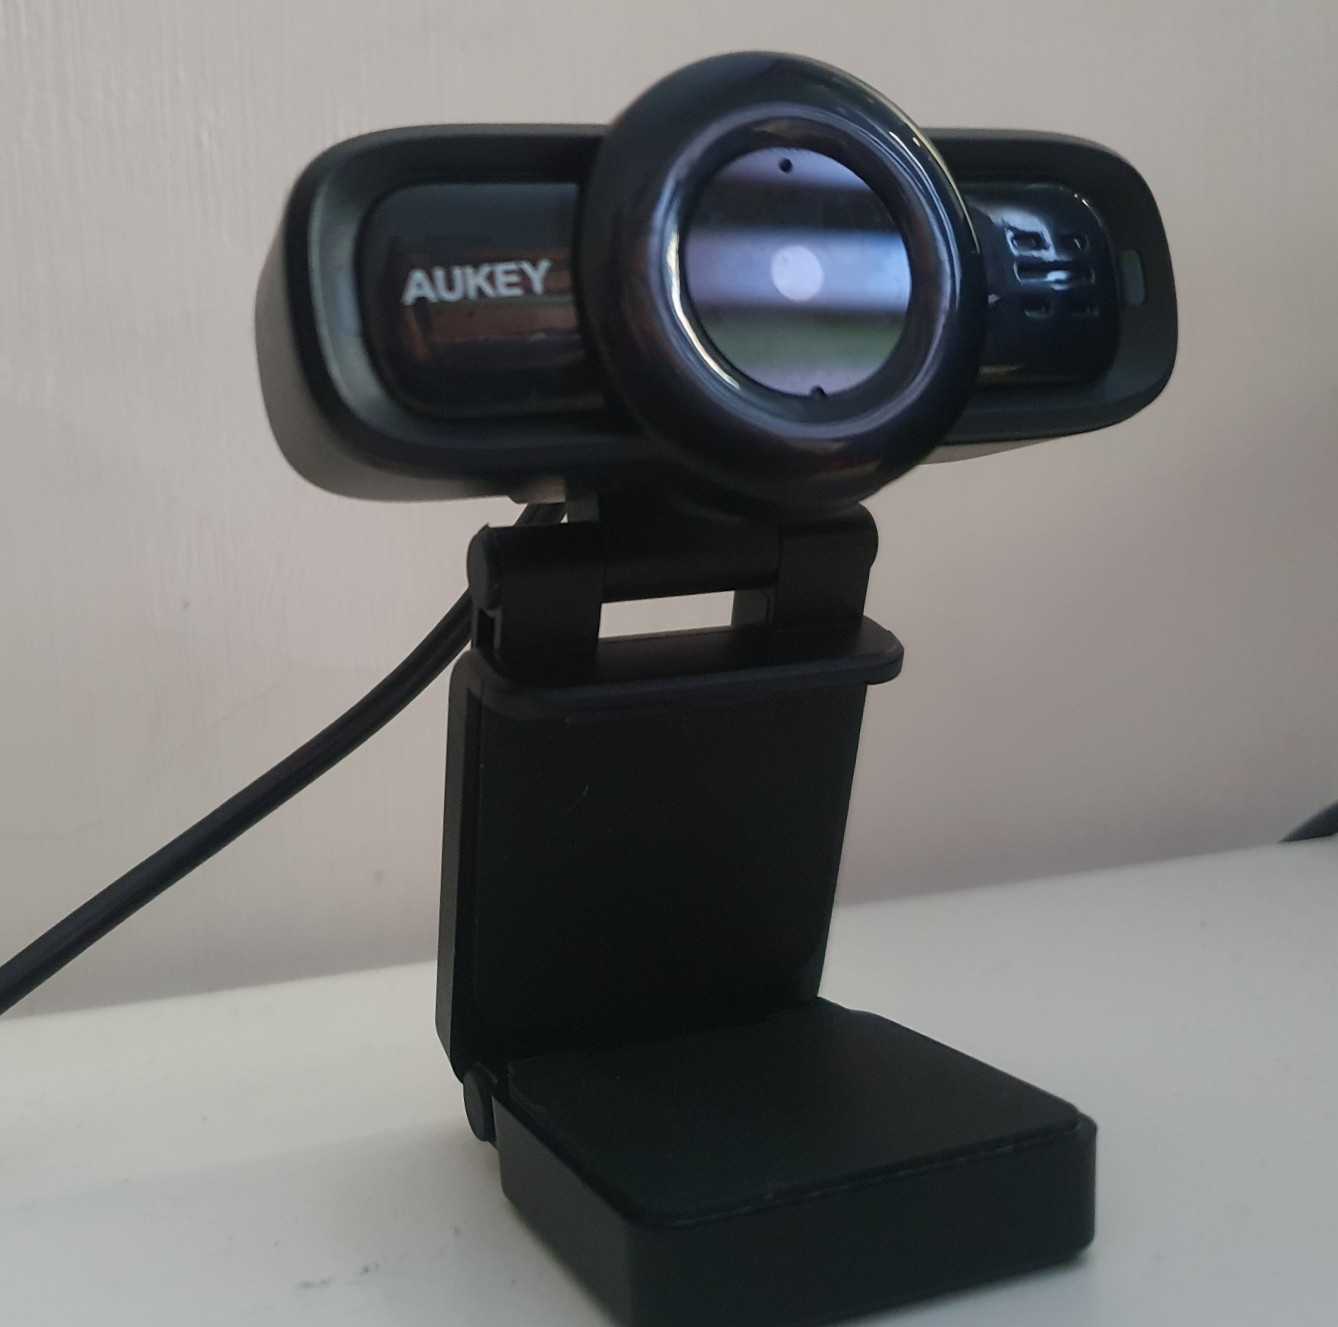 (Updated) Aukey PC-LM3 Review: Full-HD Webcam